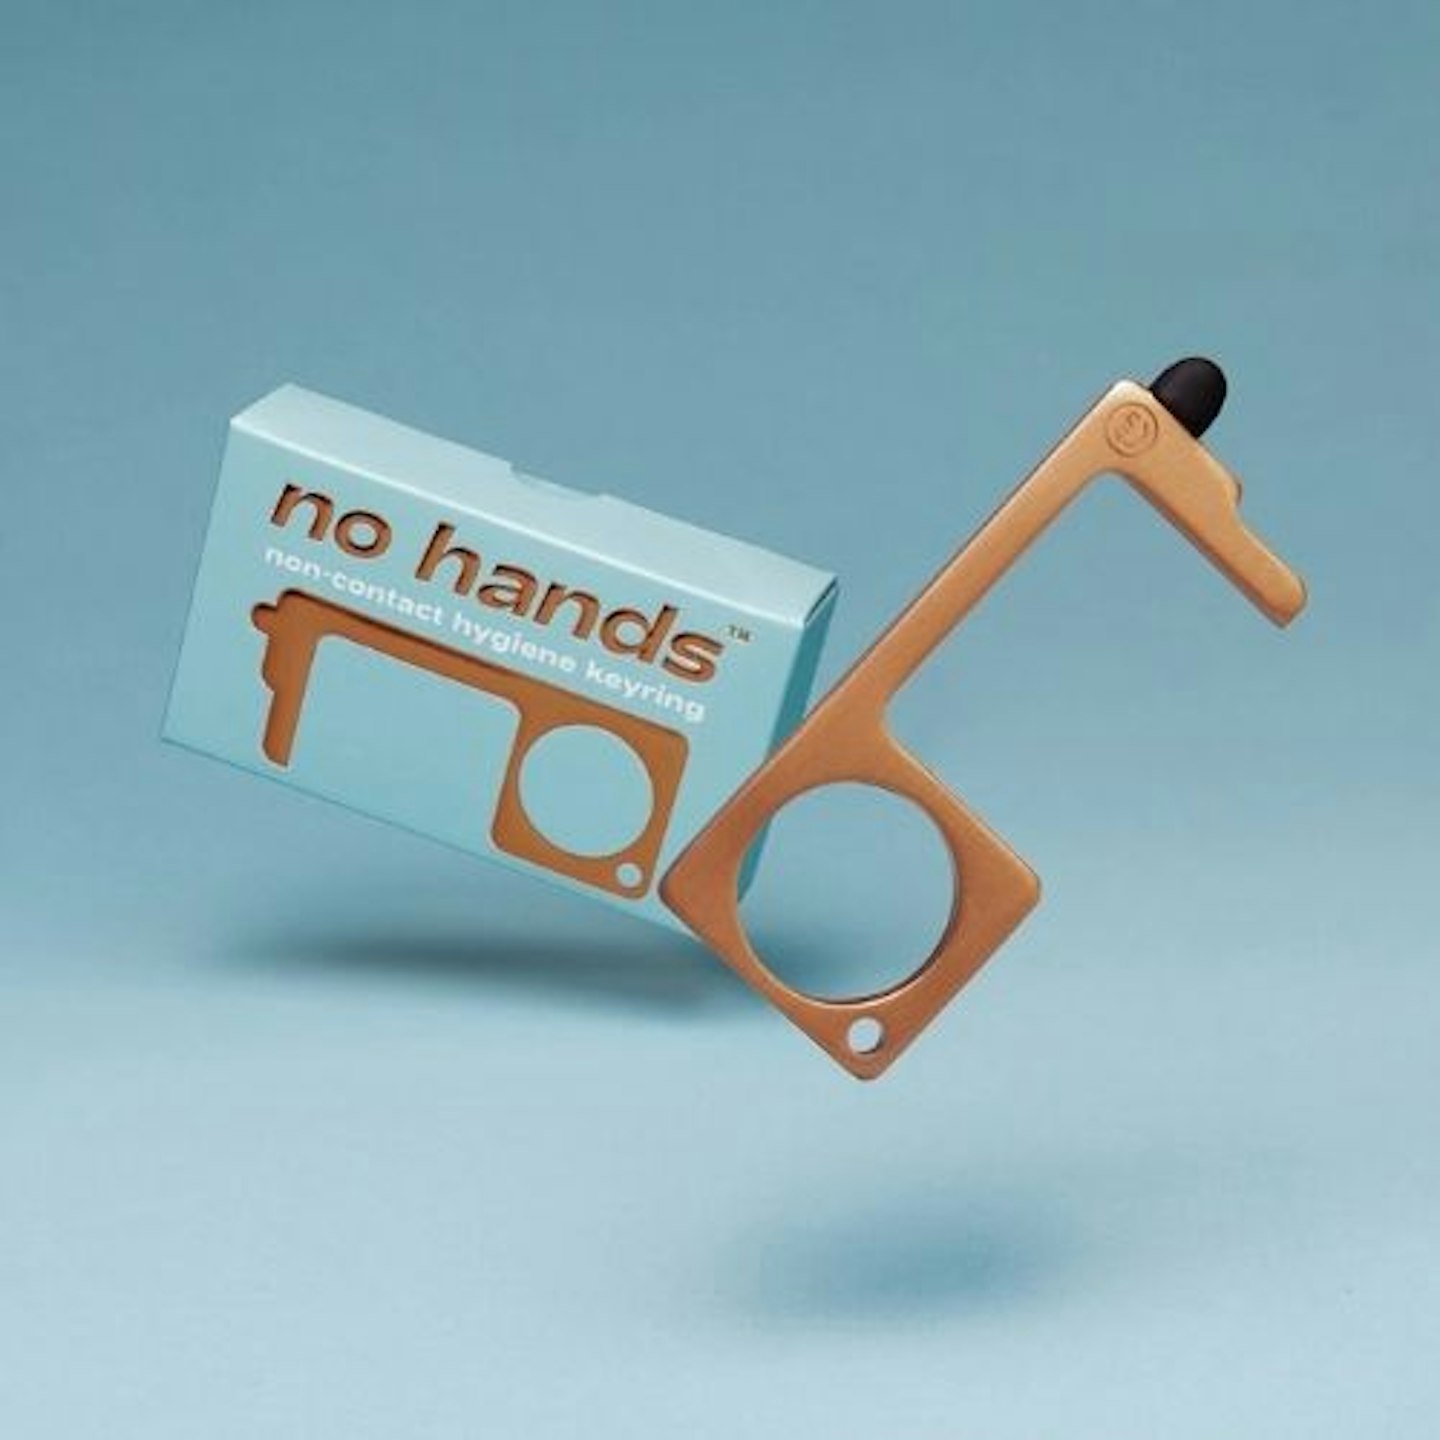 No hands - non-contact hygiene keyring